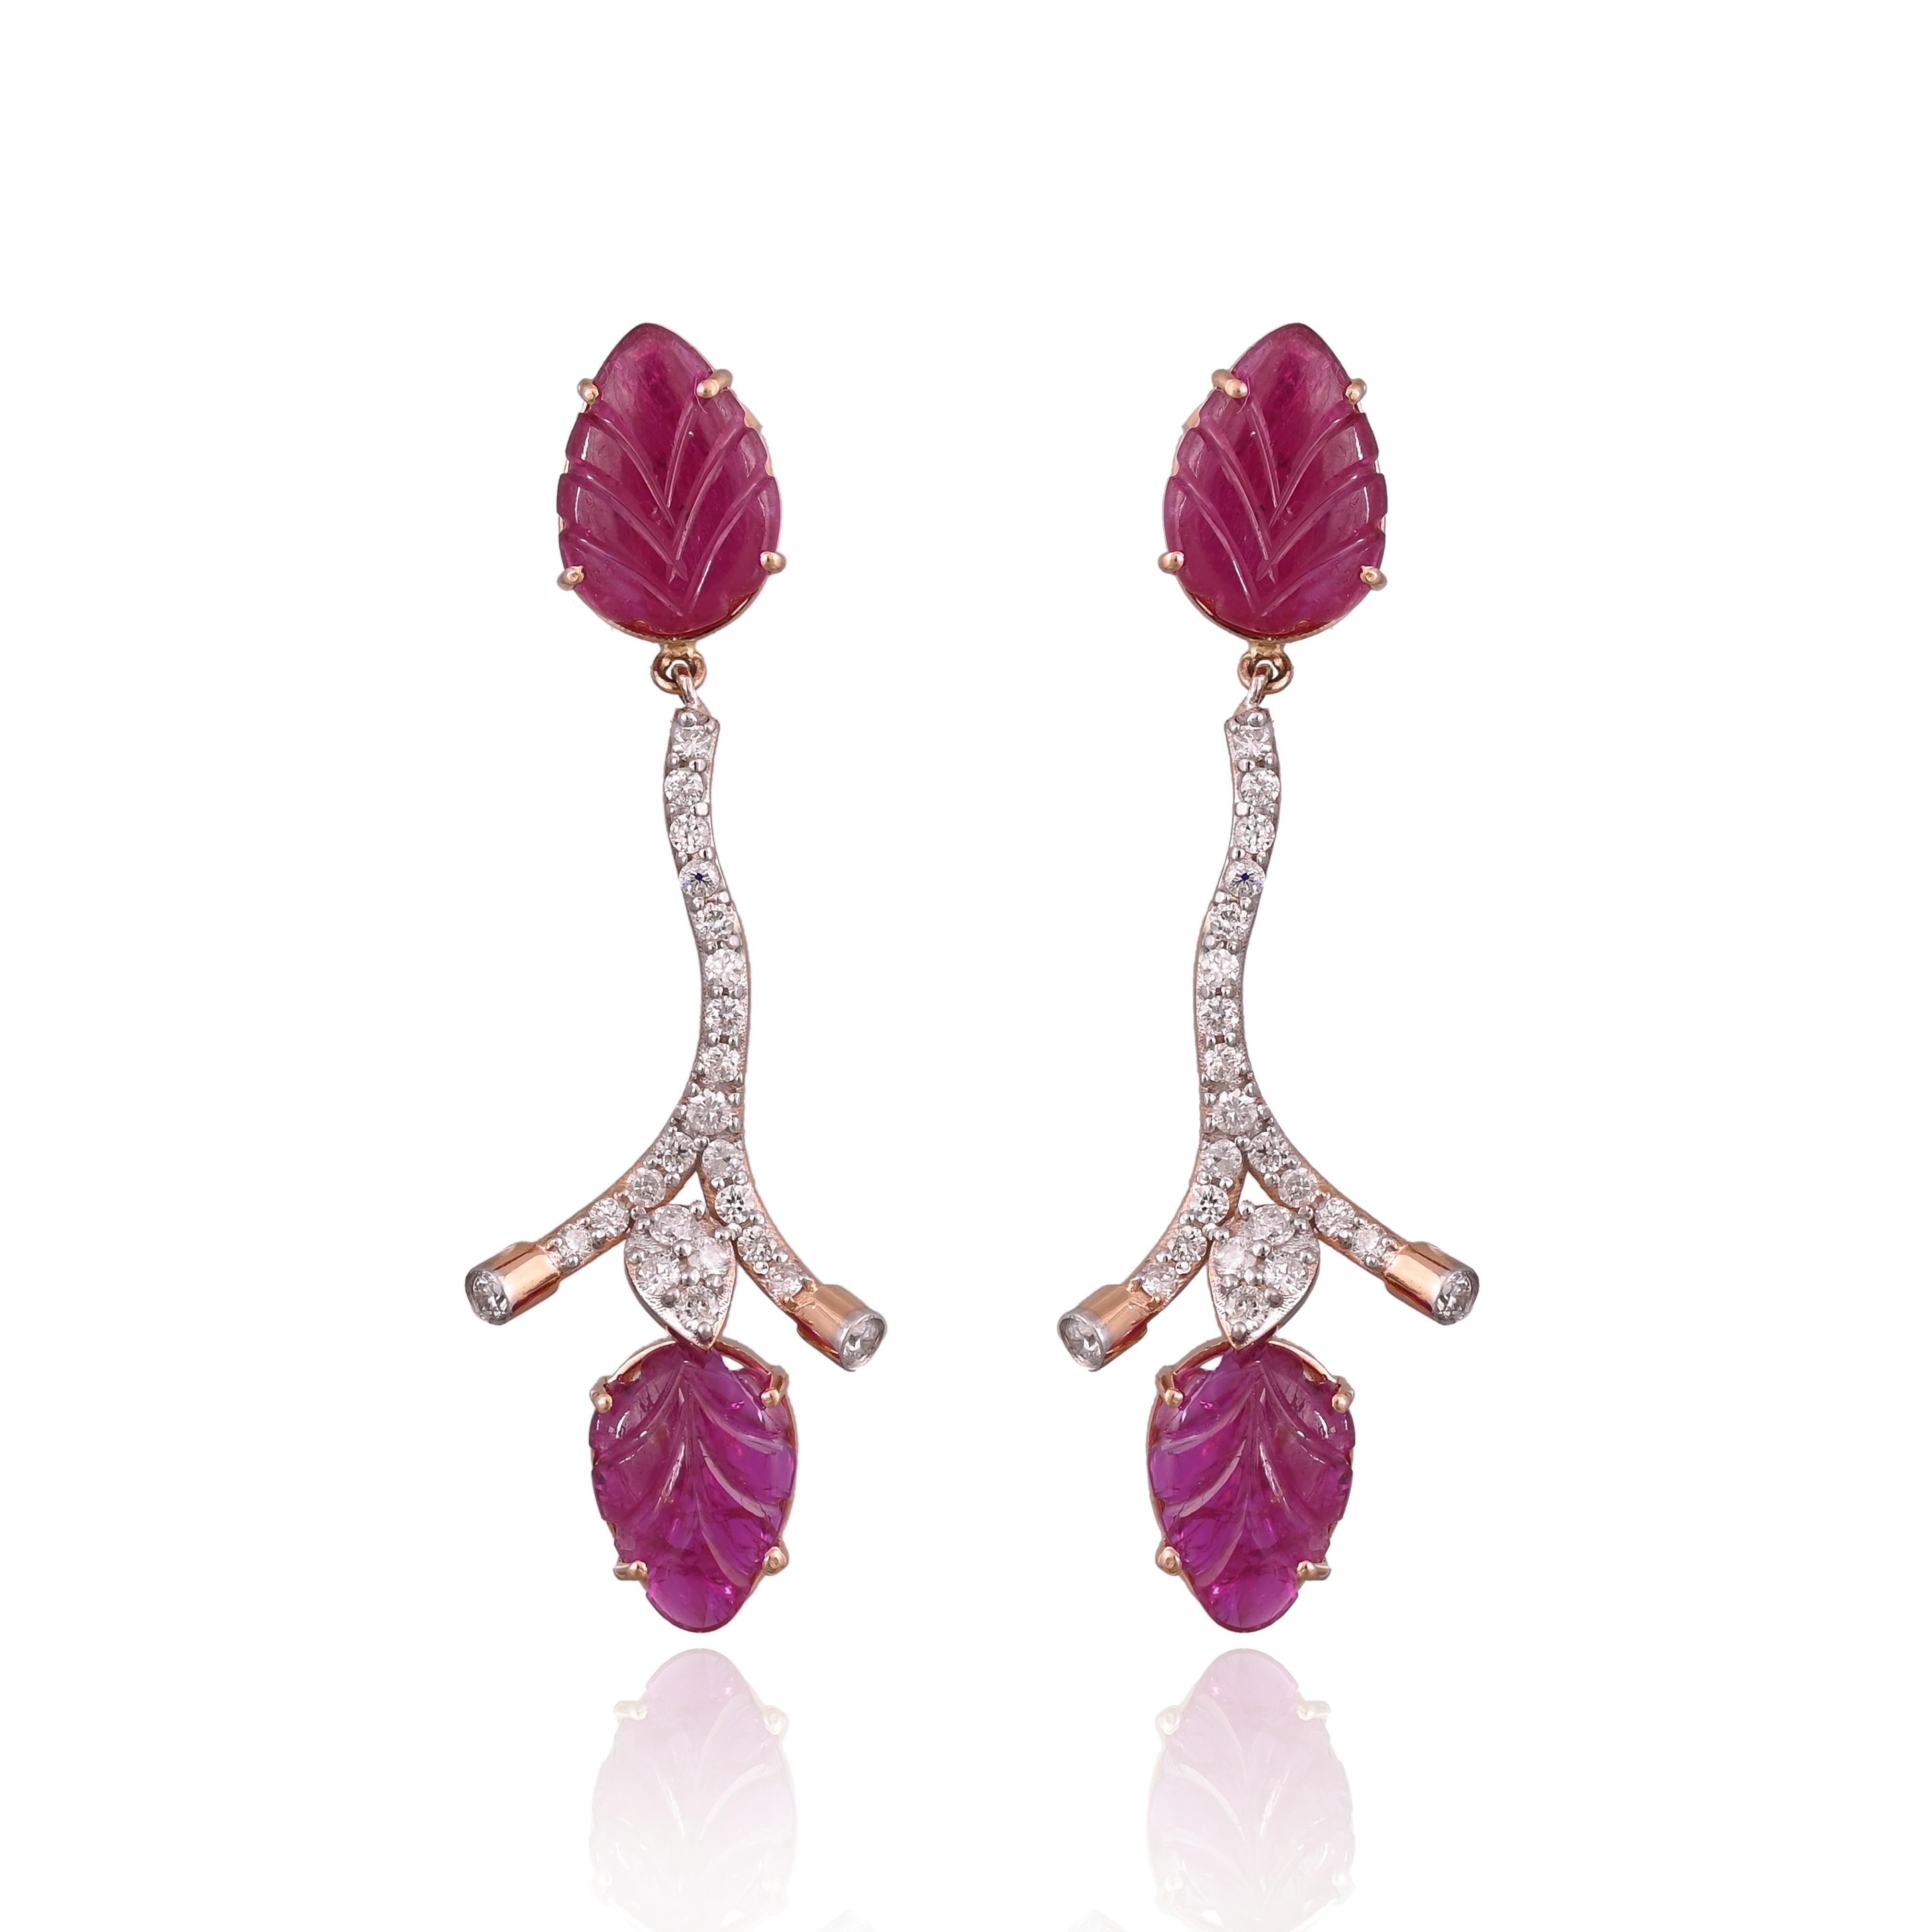 A very gorgeous and beautiful, Art-Deco style Ruby Chandelier Earrings set in 18K Yellow Gold & Diamonds. The weight of the carved Ruby is 7.75 carats. The carved Rubies are completely natural, without any treatment and are of Mozambique origin. The